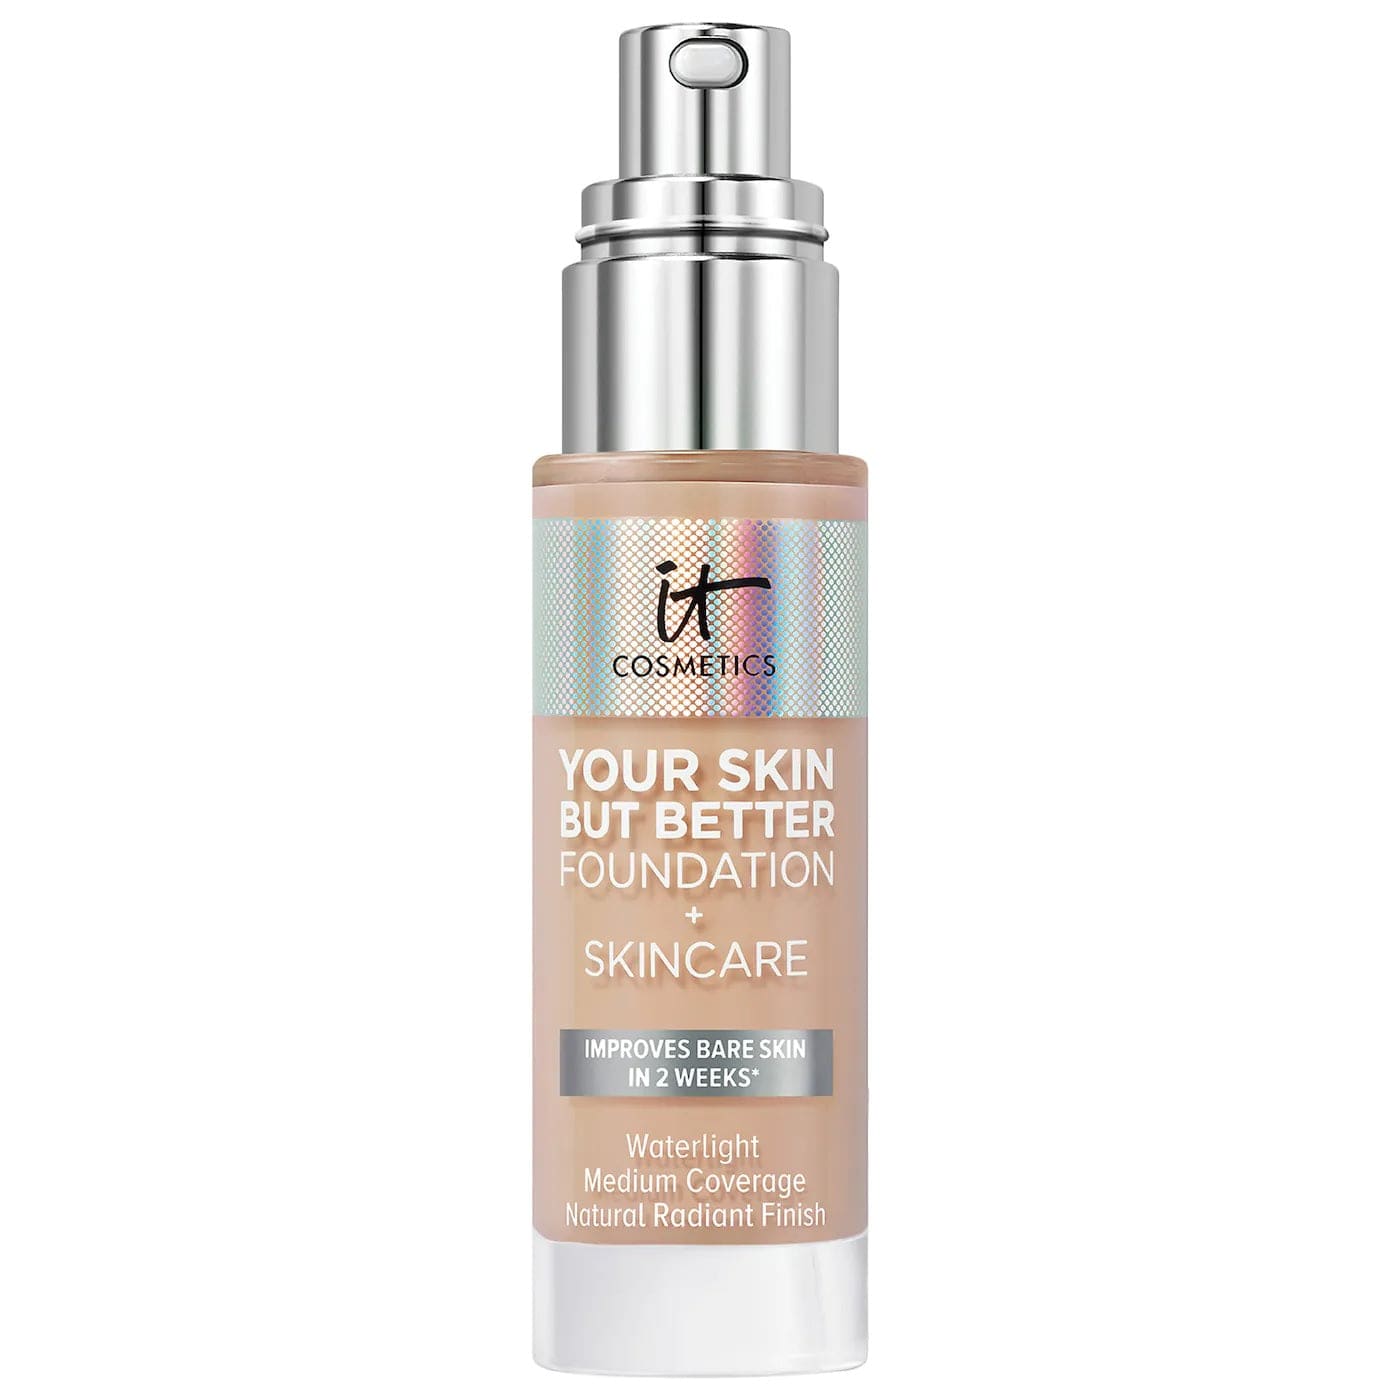 IT COSMETICS Beauty IT Cosmetics Your Skin But Better Foundation and Skincare 30ml - 22 Light Neutral